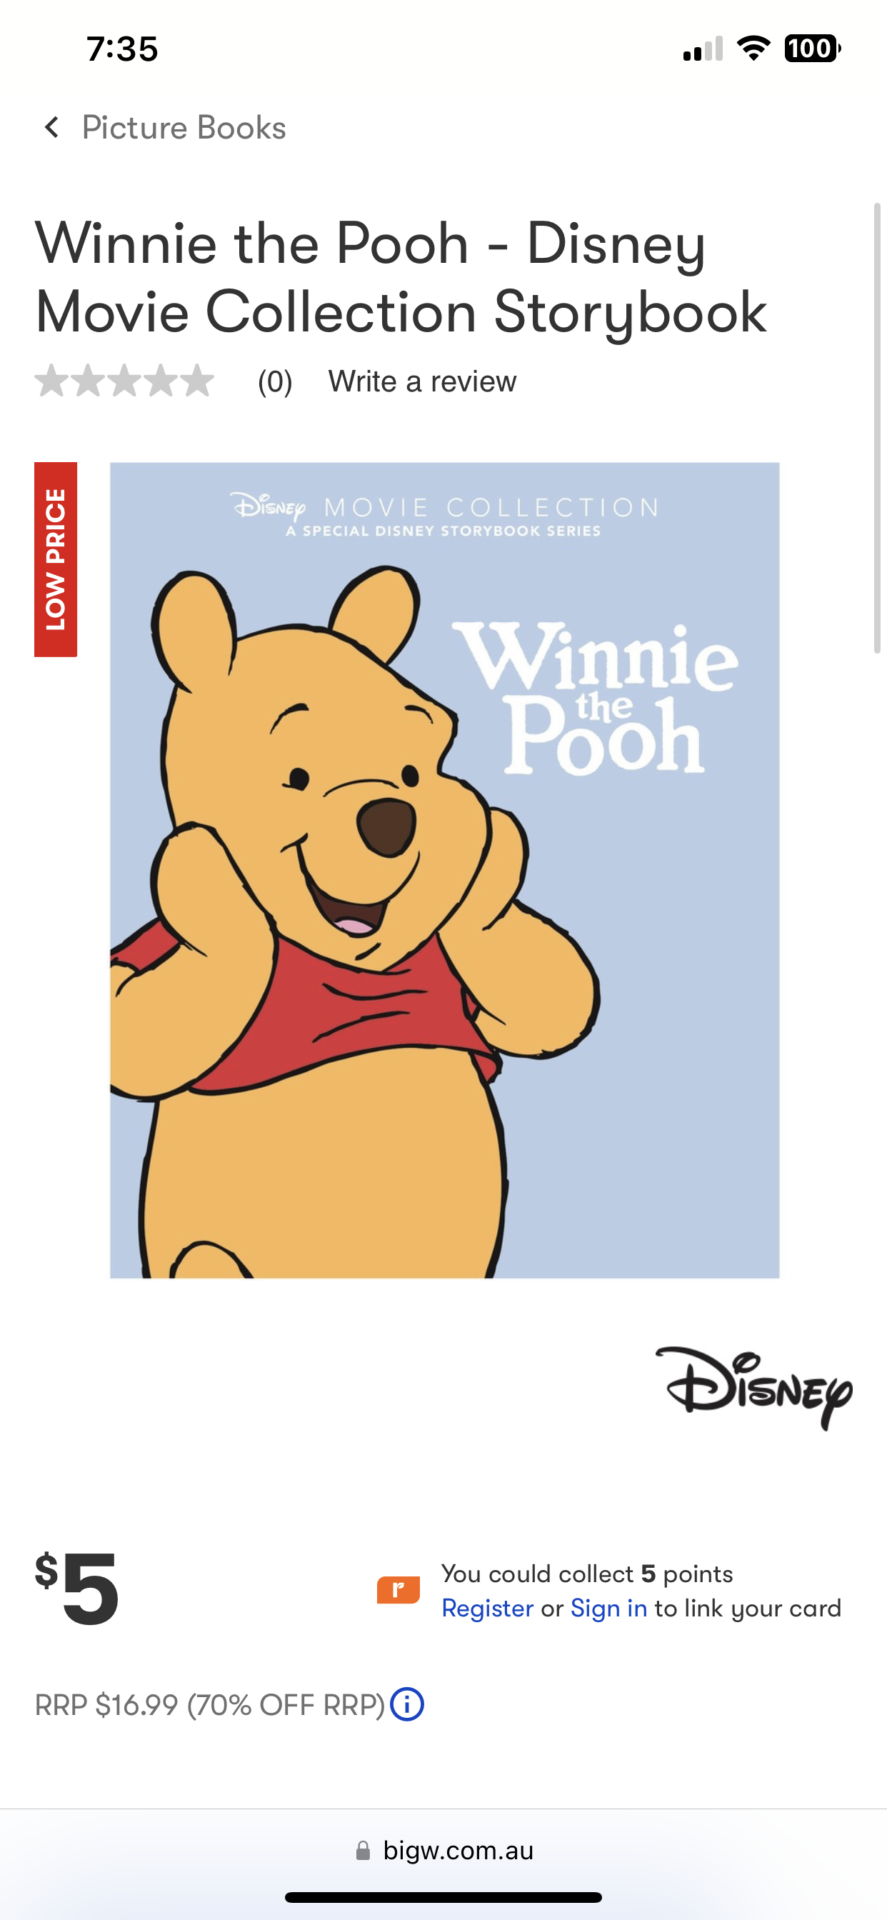 Winnie the Pooh - Disney Movie Collection Storybook